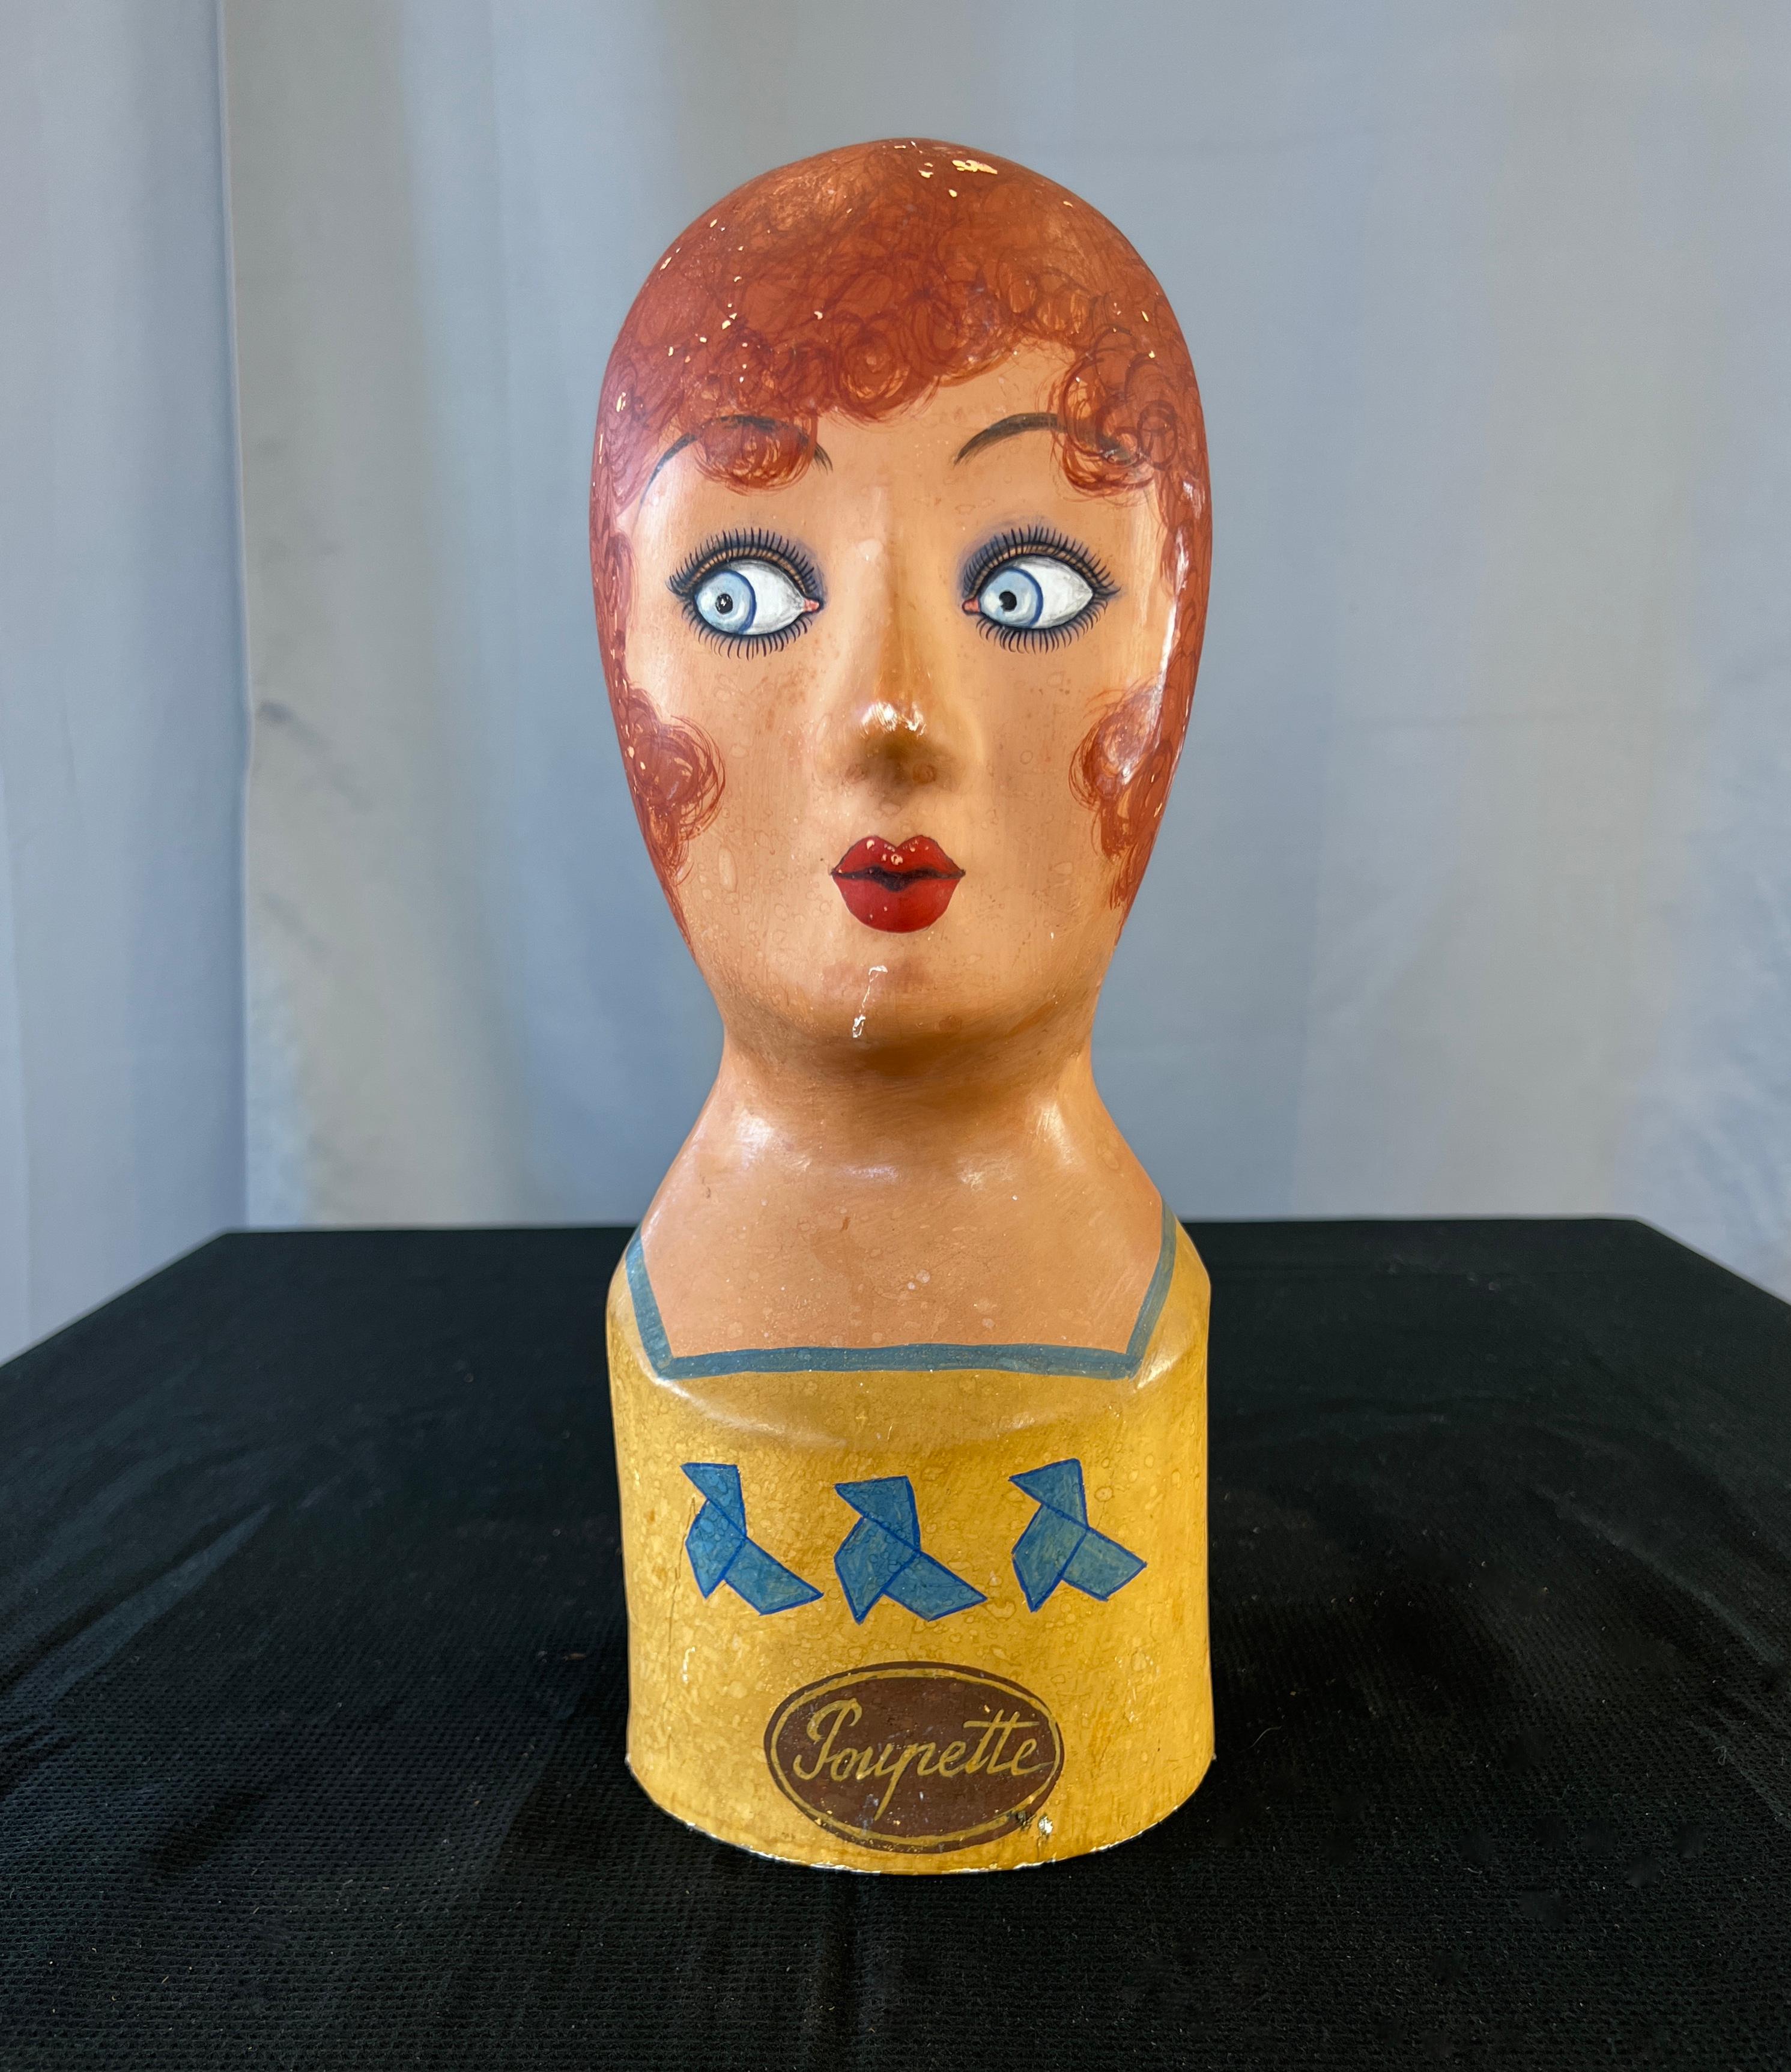 A wonderful paper maché French marotte or milliners head.
In front of the head, word Poupette(?) presumably the store she was made for,
with 